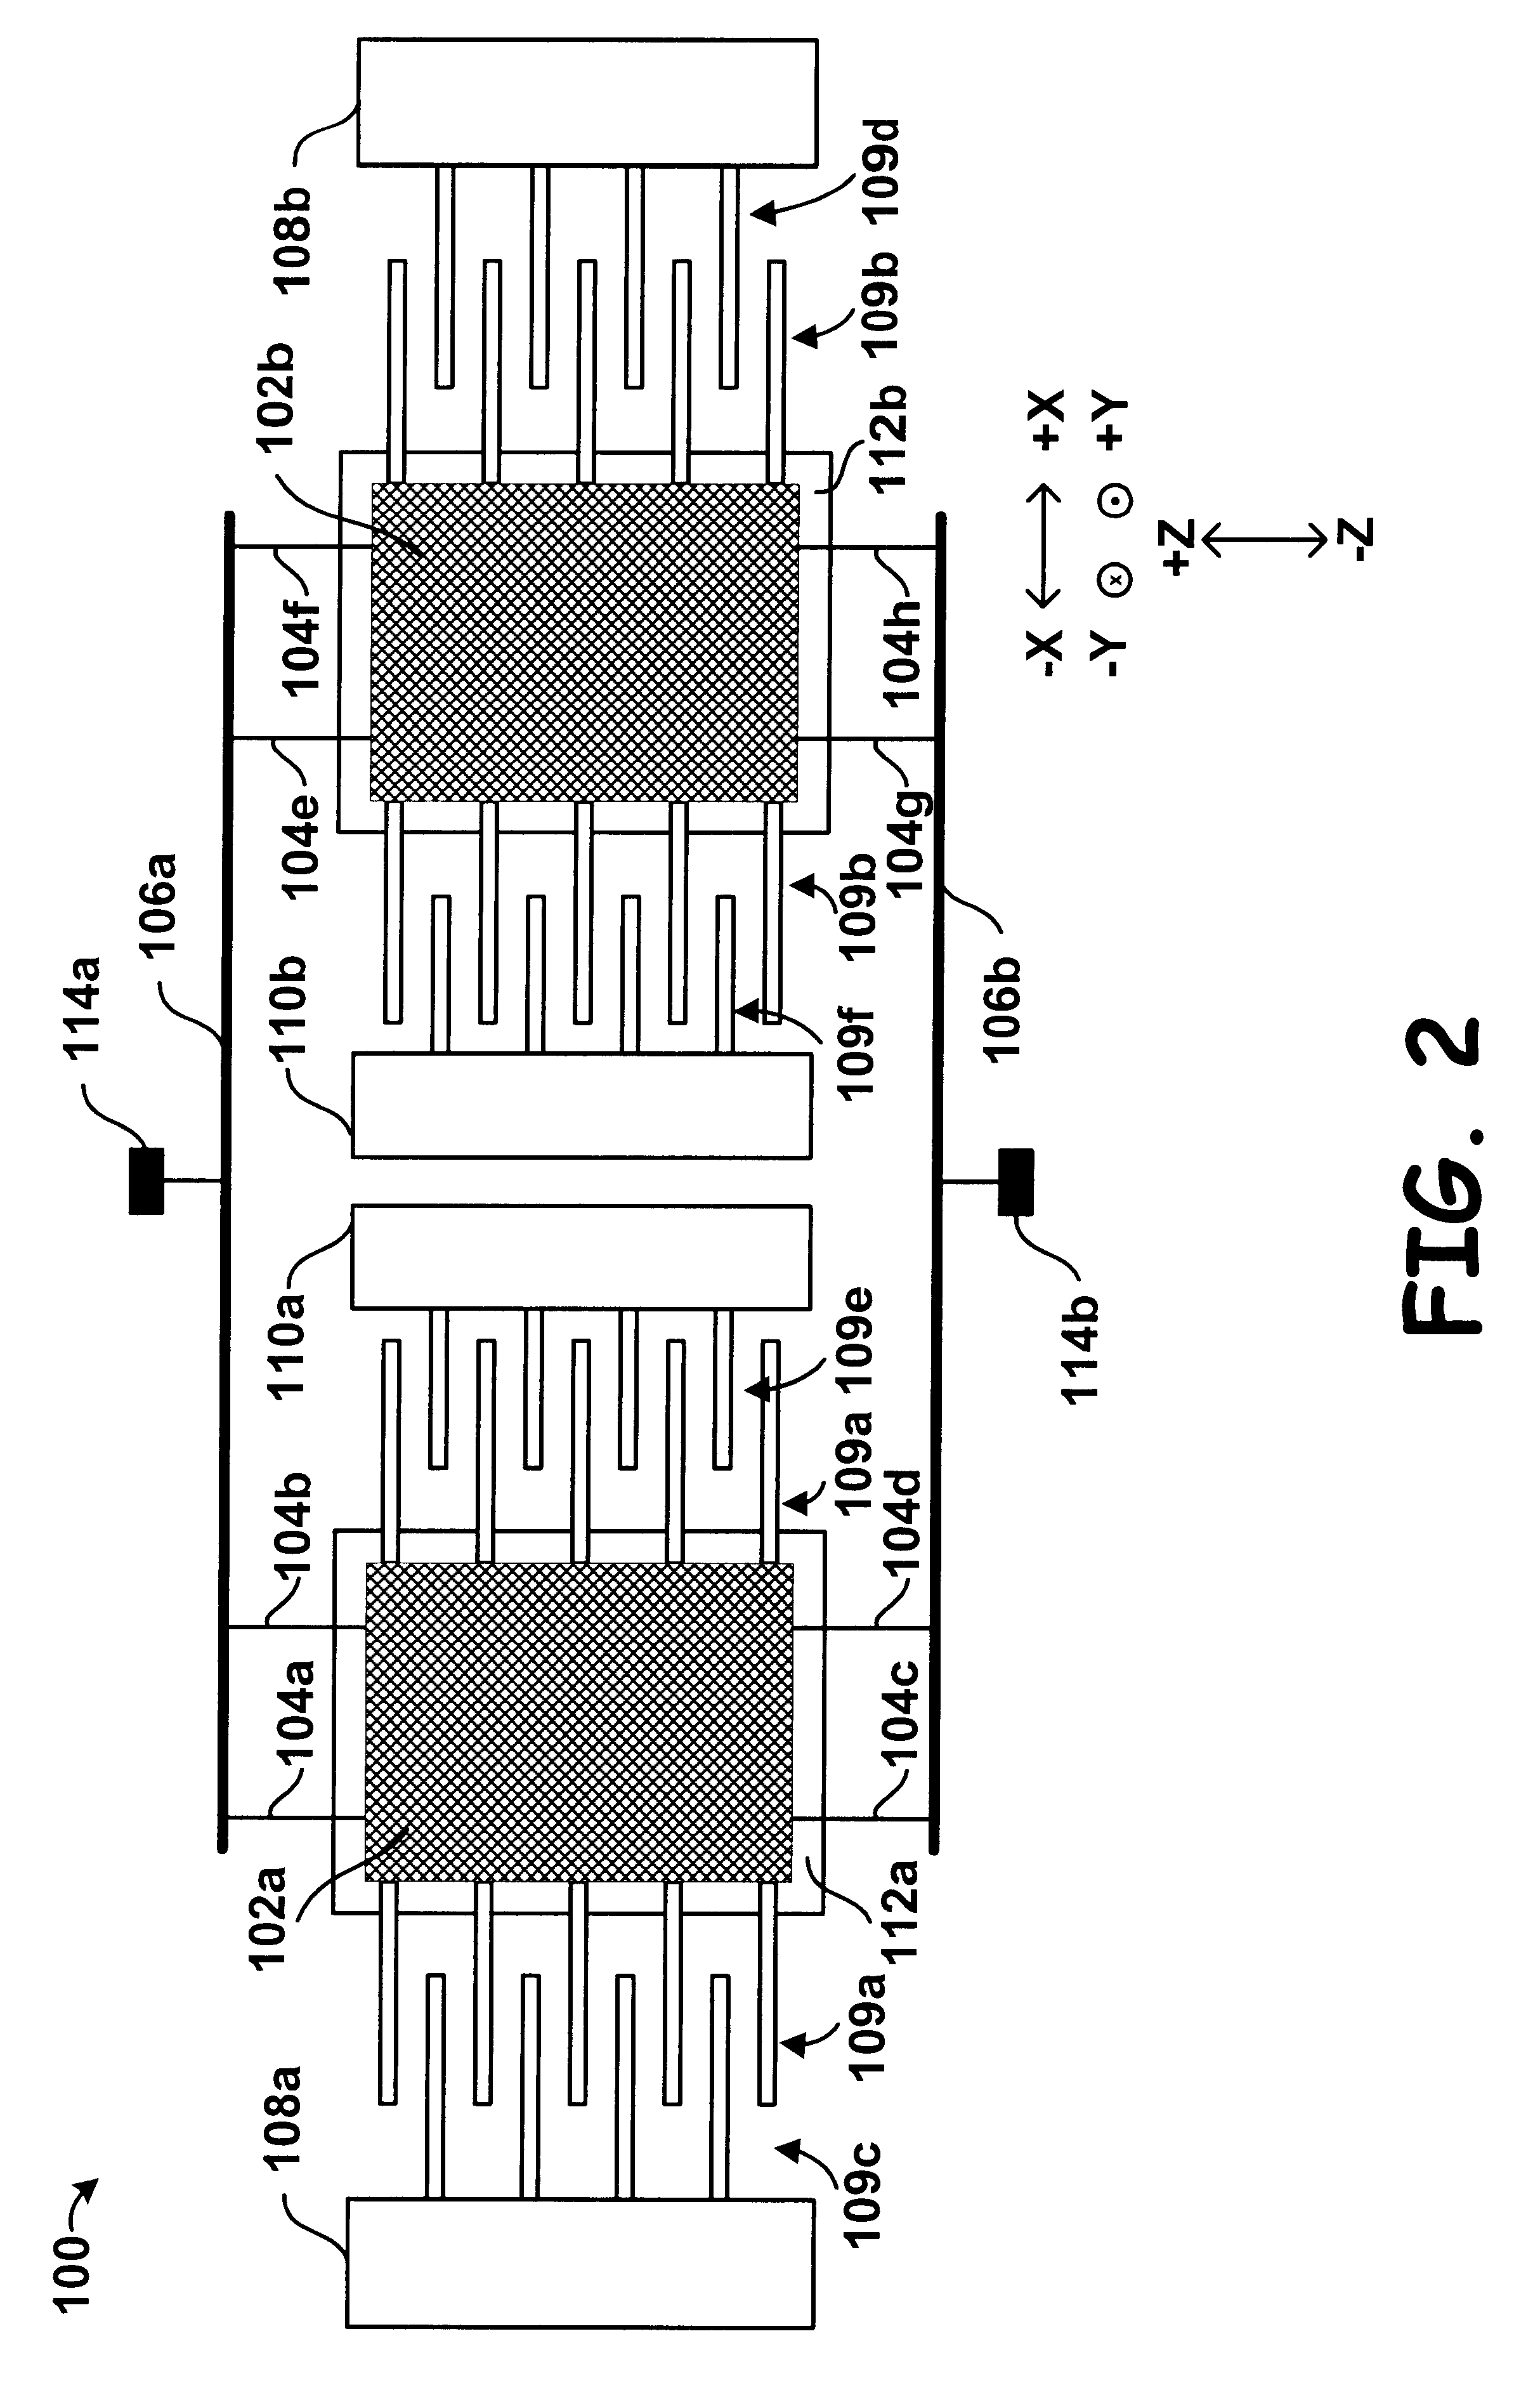 Cyrogenic inertial micro-electro-mechanical system (MEMS) device